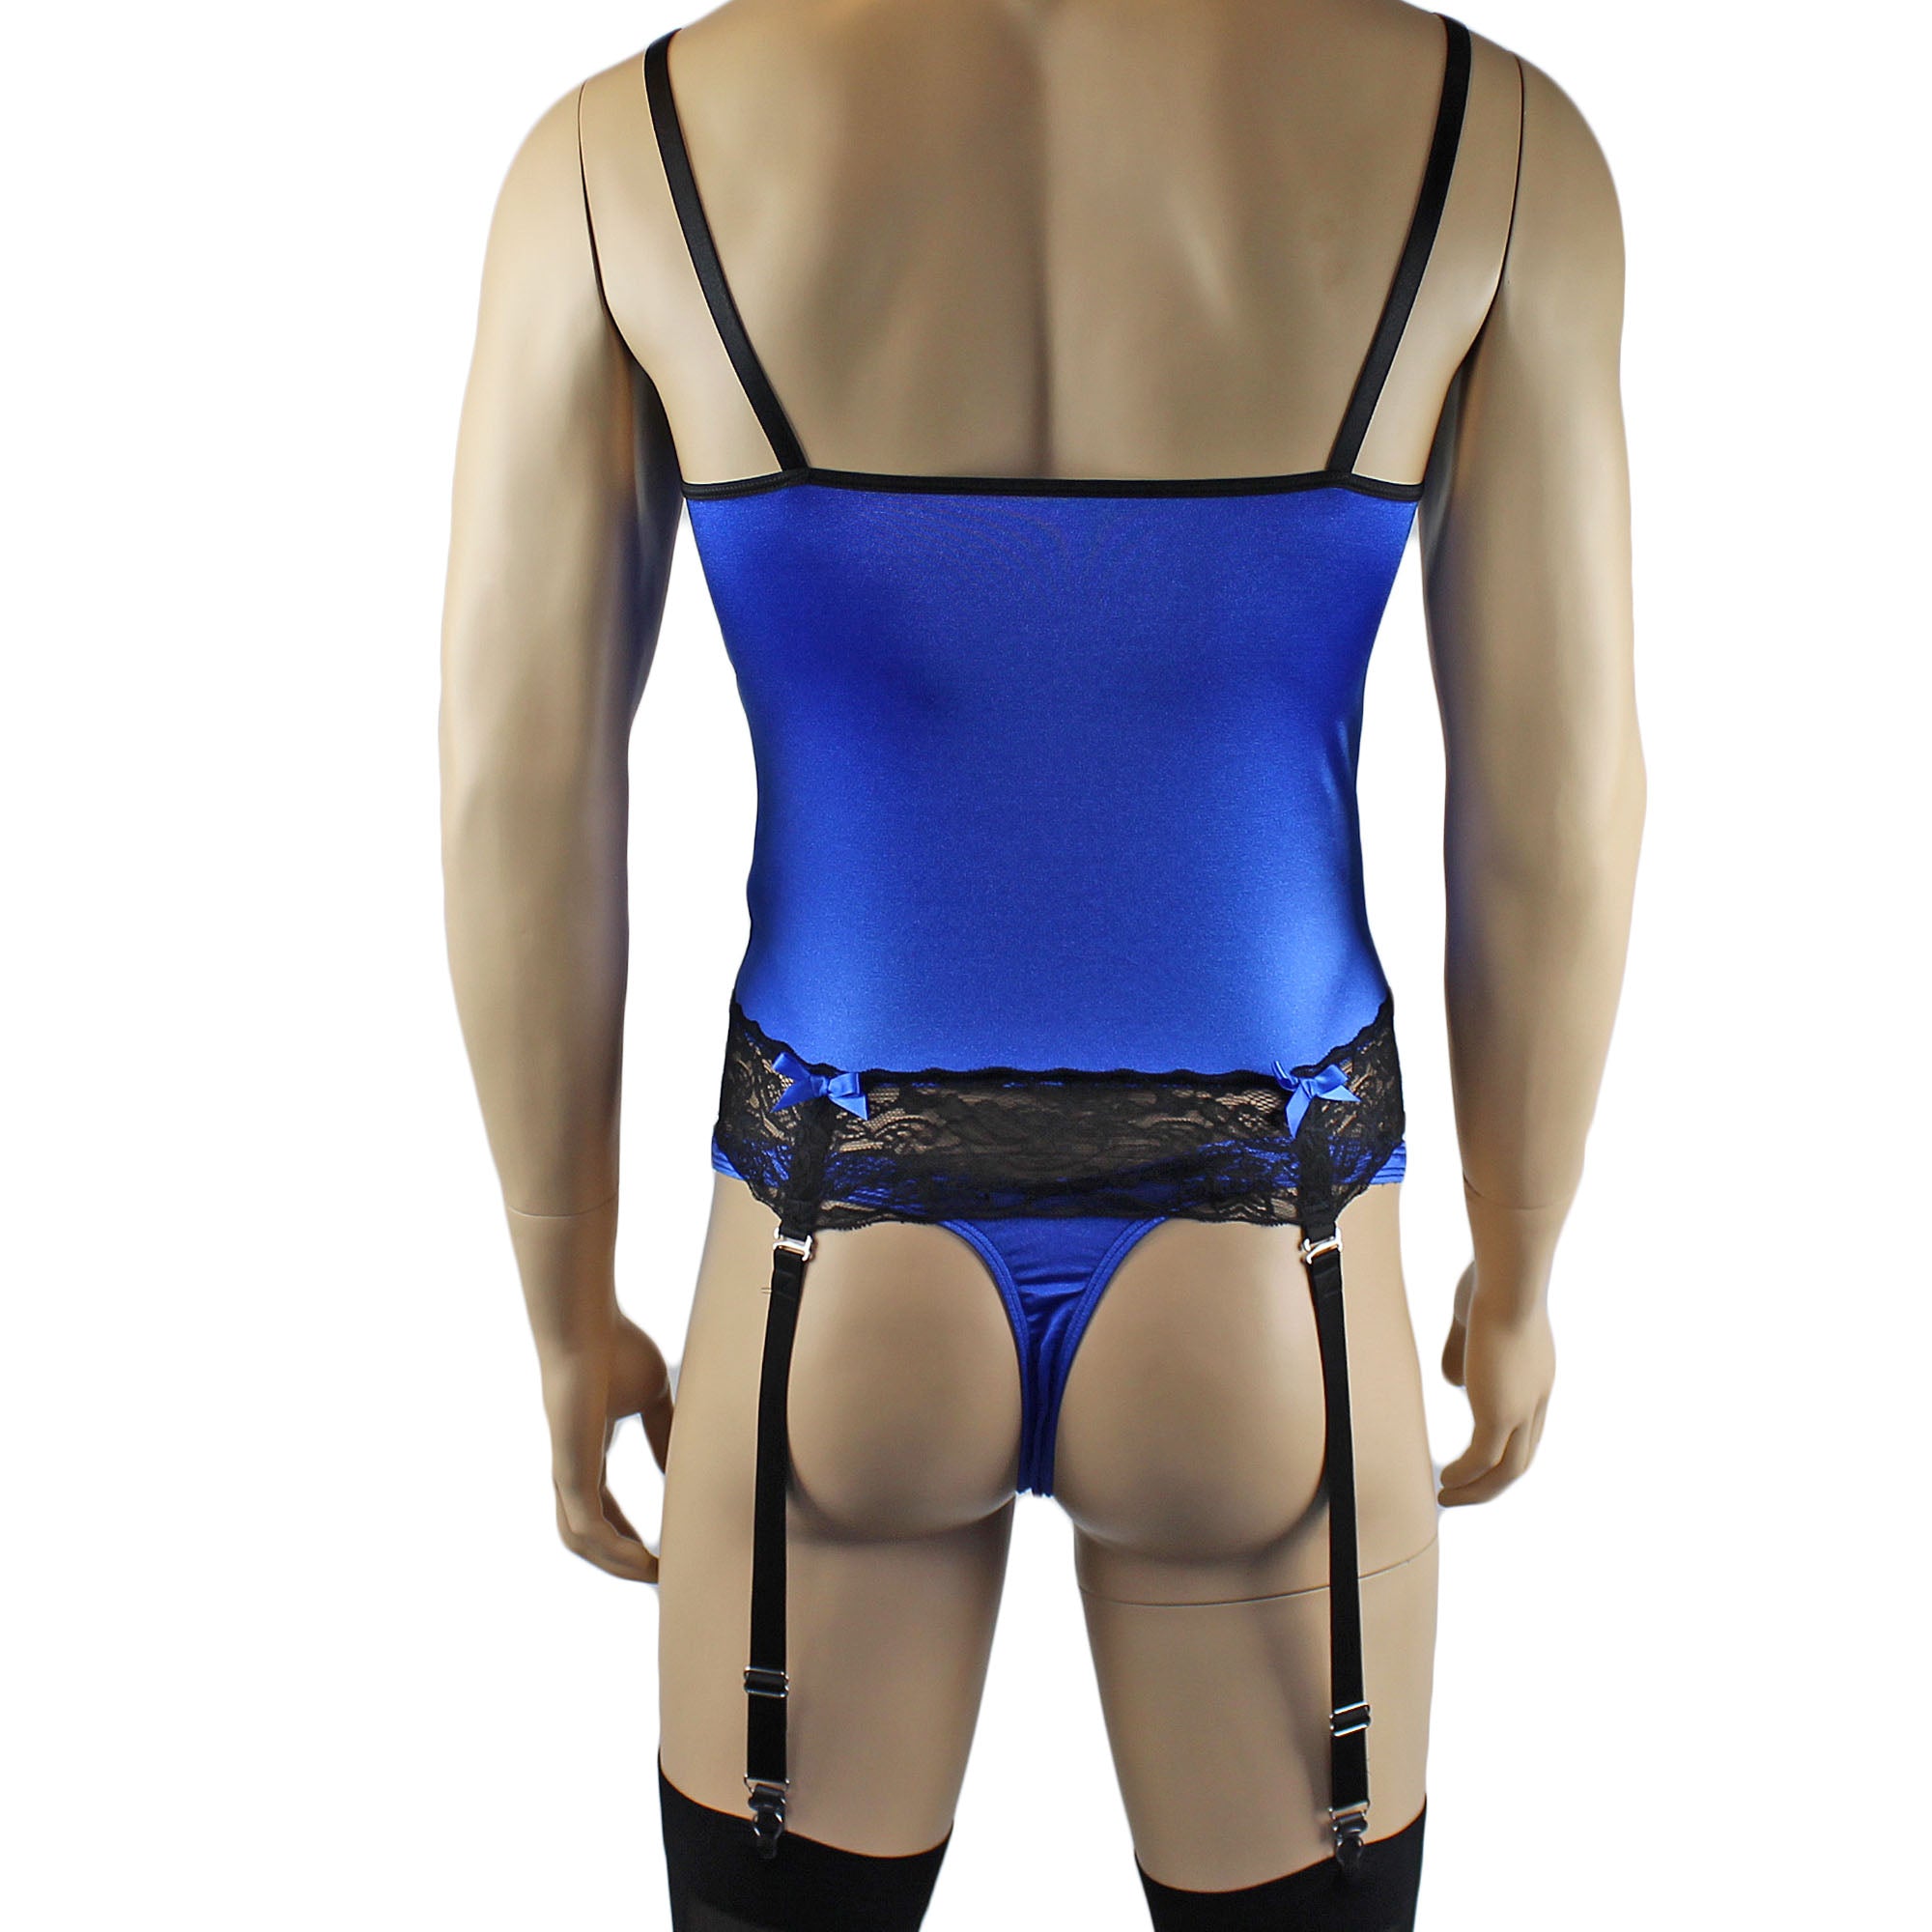 Mens Joanne Camisole Bustier Garter Top with Thong & Stockings Sizes up to 3XL Blue and Black Lace